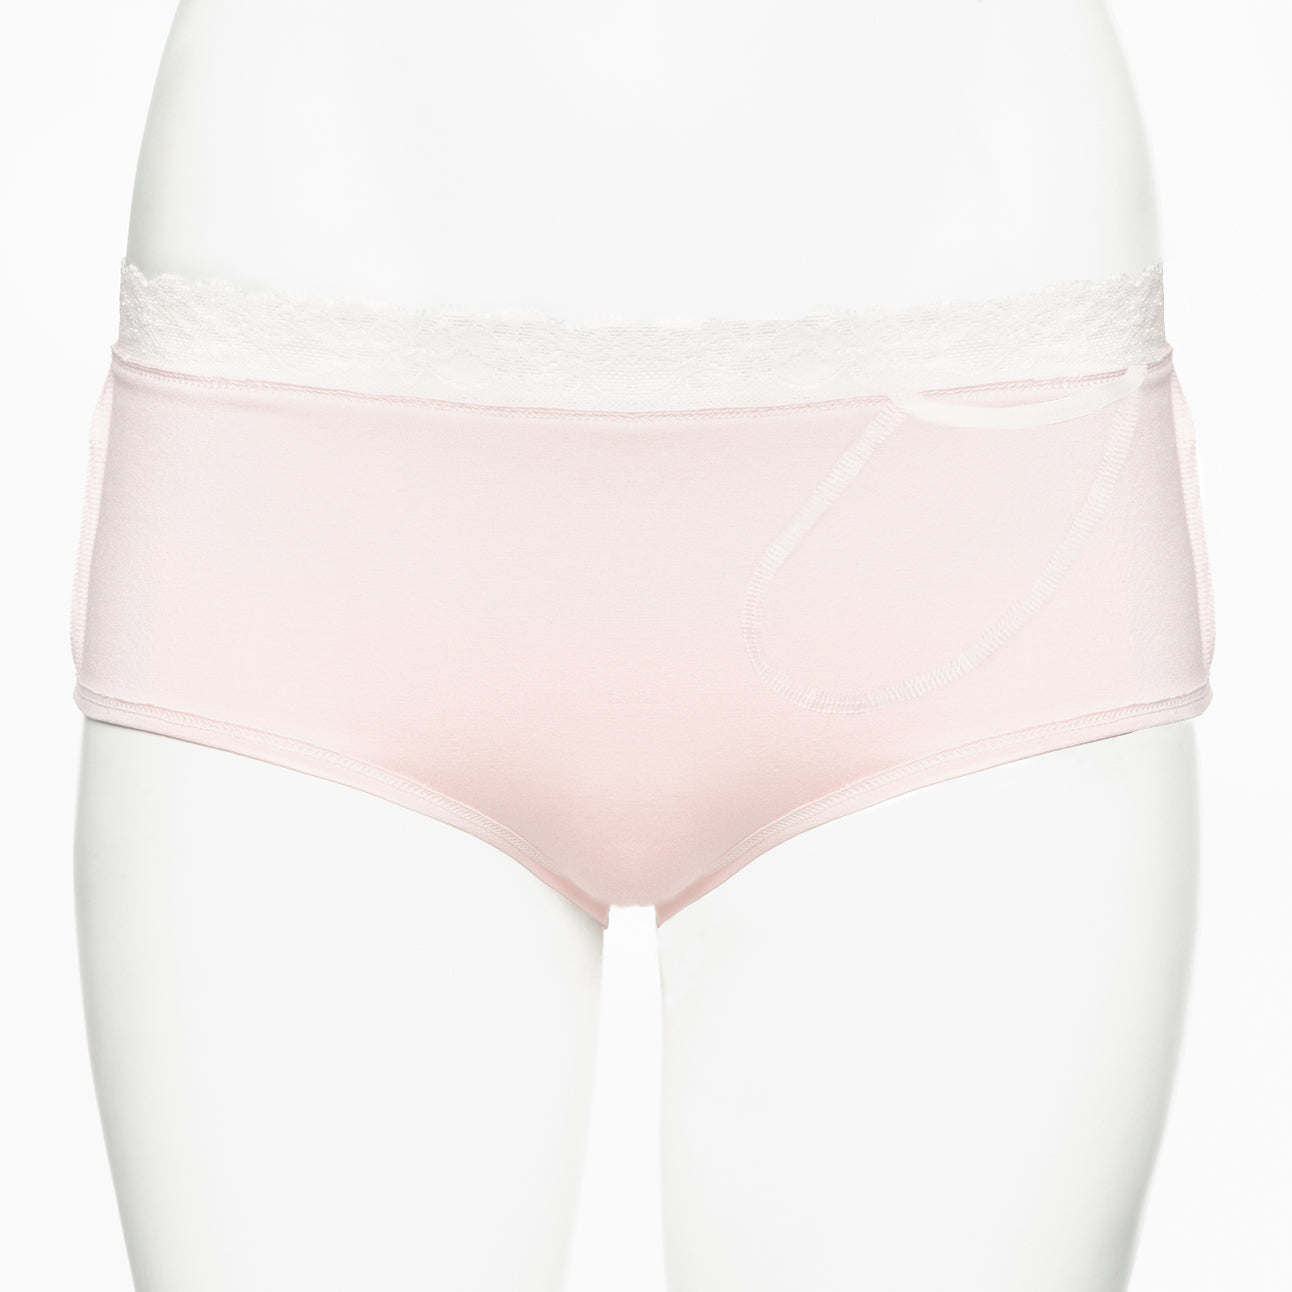 Ruby Limes insulin pump panty Rose Briolette with lace inside